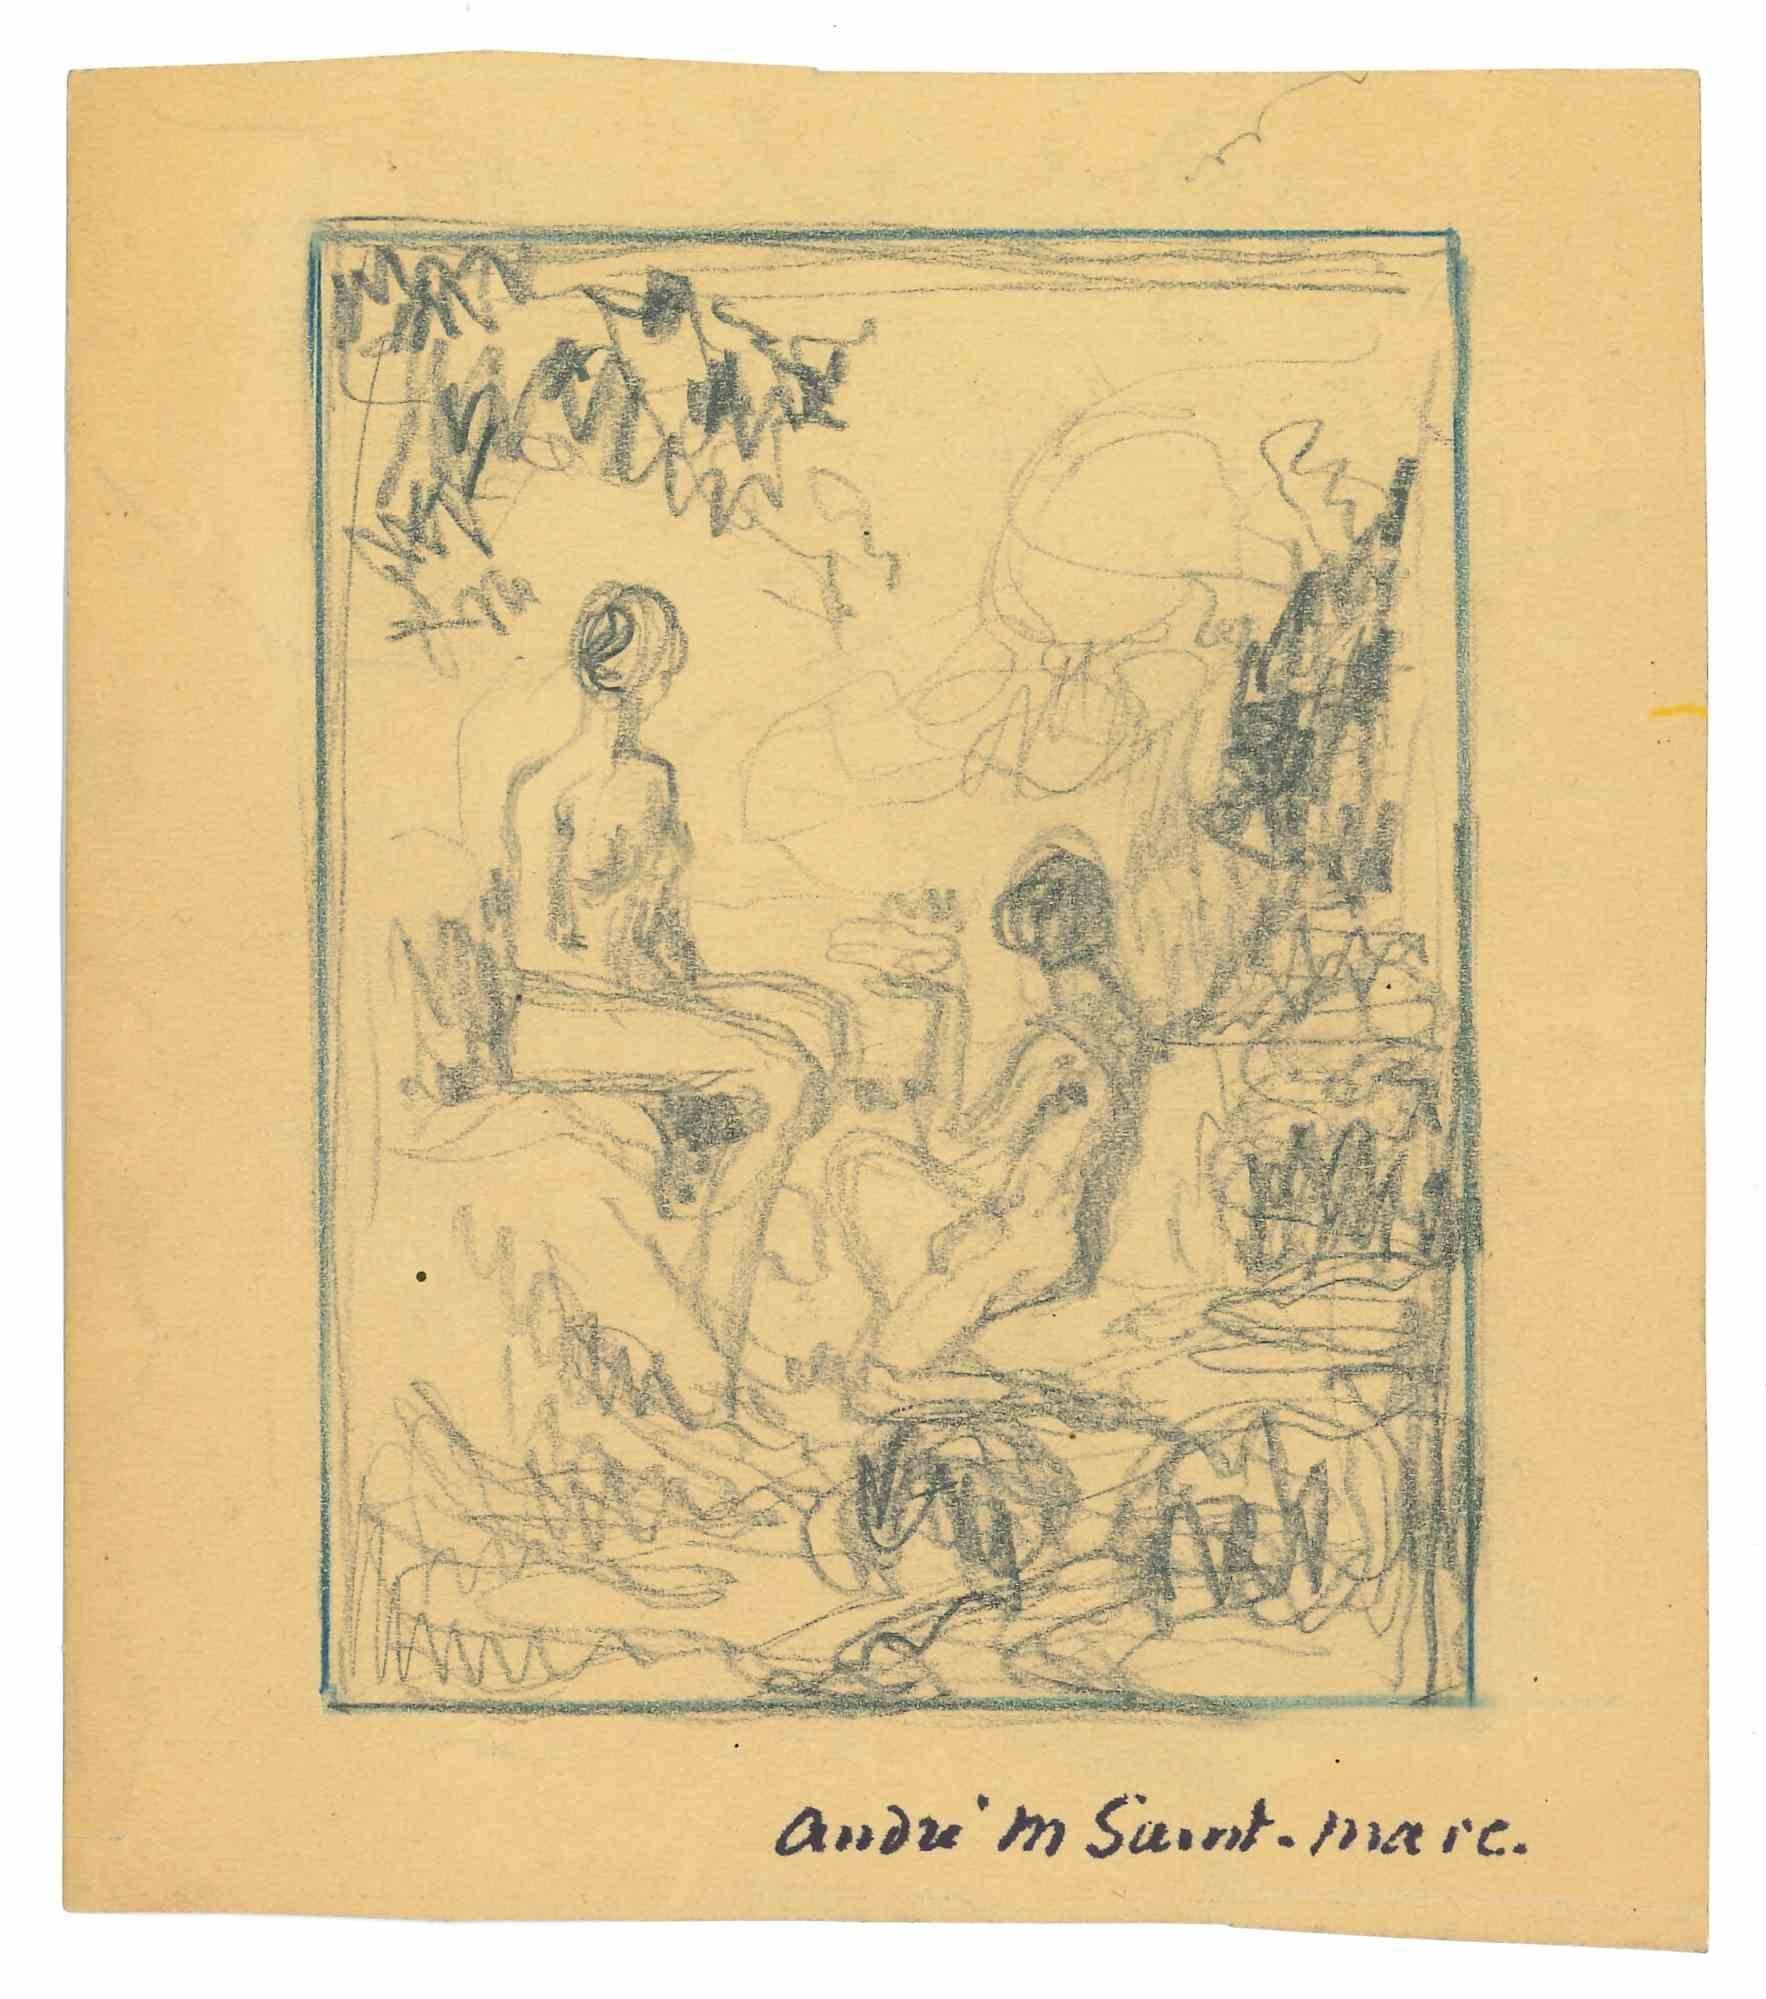 Bather - Original Pencil Drawing by André MeauxSaint-Marc - Early 20th Century